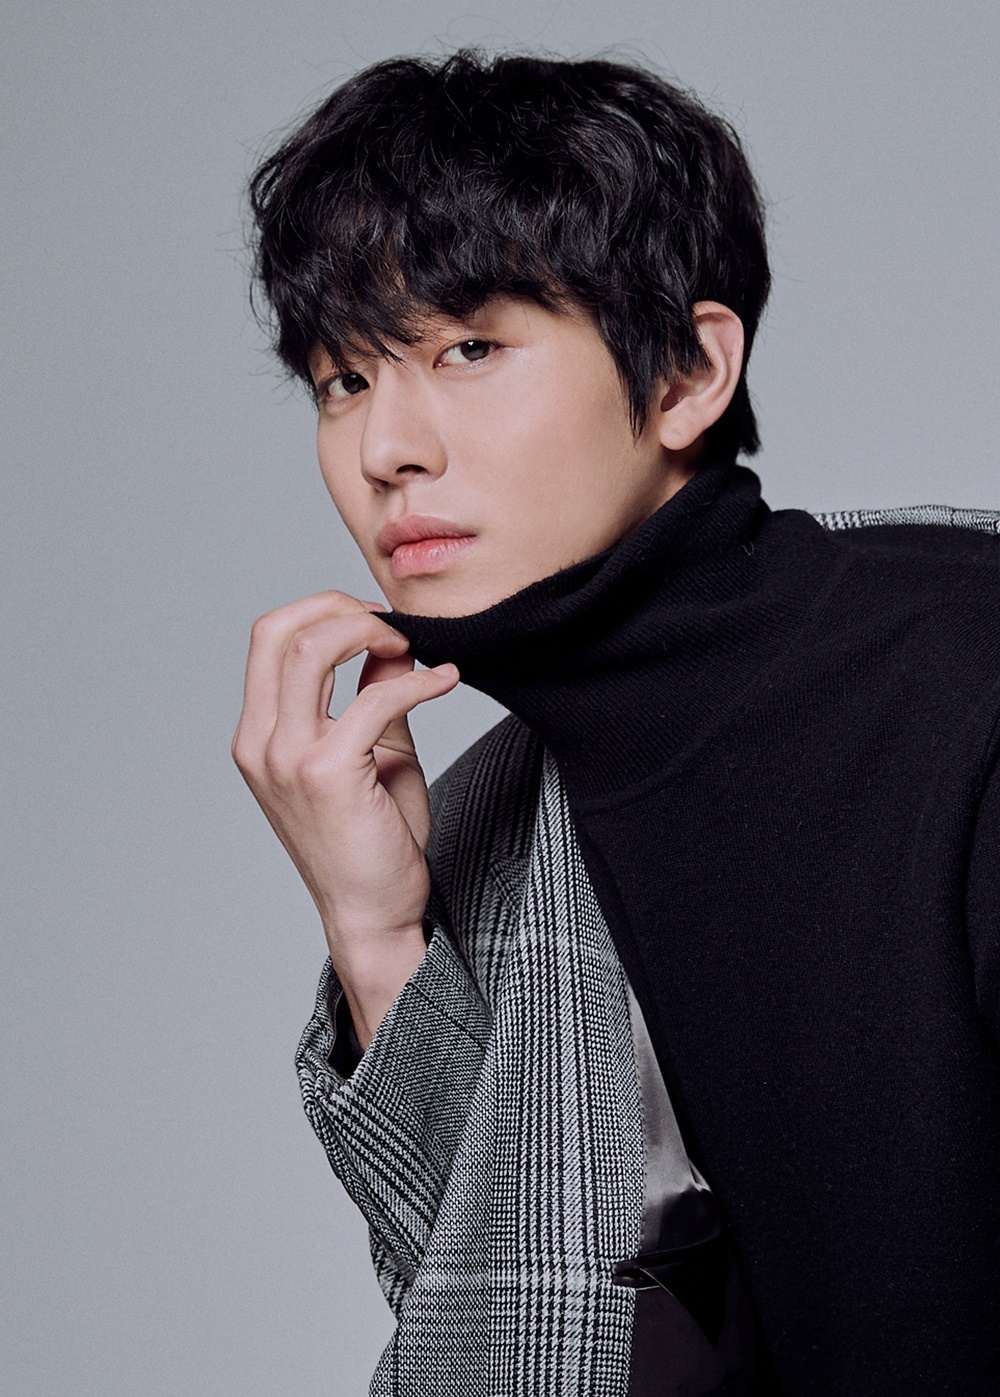 Seoul = = As much as watching a work, it is also exciting to see an actor who grows as he continues to work.Actor, who has recently been loved by many viewers, is Ahn Hyo-seop, the main character of SBS Romantic Doctor Kim Sabu 2, which ended at the end of last month.In 2015, he started with the drama Fondant Fondant LOVE, followed by Queen of the Ring, and My father is strange.After building up his experience, he transformed into a boy with a face of a horse in Thirty but Seventeen (2017), and a man with innocent charm in Abyss (2018), and completed the blunt growth drama of Seo Woo-jin, a wounded young man in Romantic Doctor Kim Sabu 2.It was an opportunity and a challenge for Ahn Hyo-seop to show all the things that he did not show before.In the first medical drama, I received homework to express the story of an adult who is ten years older than himself, a mature melodrama, and a remady of a person with a large amplitude of emotion.Seo Woo-jin, who expressed his deep eyes and emotions, succeeded in attracting viewers.Ahn Hyo-seop said that he was a youth who did not believe in romance like Seo Woo-jin, and learned how to find real romance through Romantic Doctor Kim Sabu and how to like more Acting by meeting Han Suk-kyu.Like Seo Woo-jin, it is a romantic story of Ahn Hyo-seop that he could grow big too.- Han Suk-kyu said that he was very pretty at the scene.- Did you ask a lot of advice from Han Suk-kyu?- We achieved 27% of the audience rating. In three years of mini-series, more than 25% of the drama came out.- Realize the popularity.- What is memorable during the reaction of colleagues or close people.- There is a reputation that Melody has suddenly progressed.- I had to show a different result from the existing melodrama. The melodrama of this work felt quite a man and an adult.- Co-work with Lee Sung-kyung.- Shes a good-looking girl. Shes a good fit.2 Lee Sung-kyung and Mello, a mature expression effort